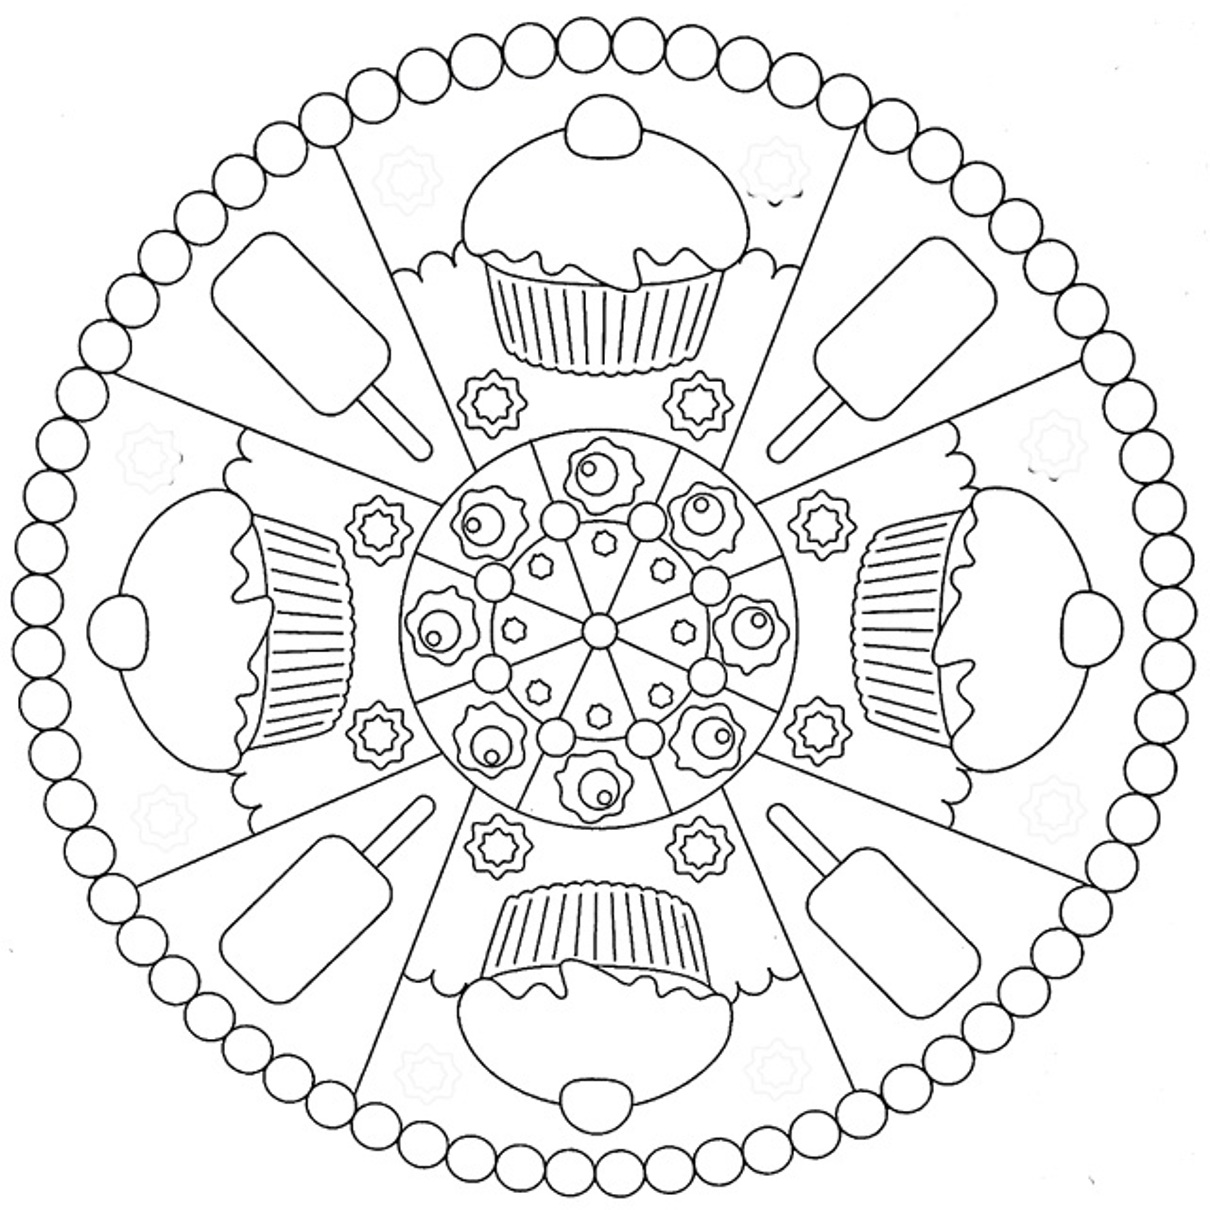 Cookies And Ice Cream Mandala S31a7 Coloring Page